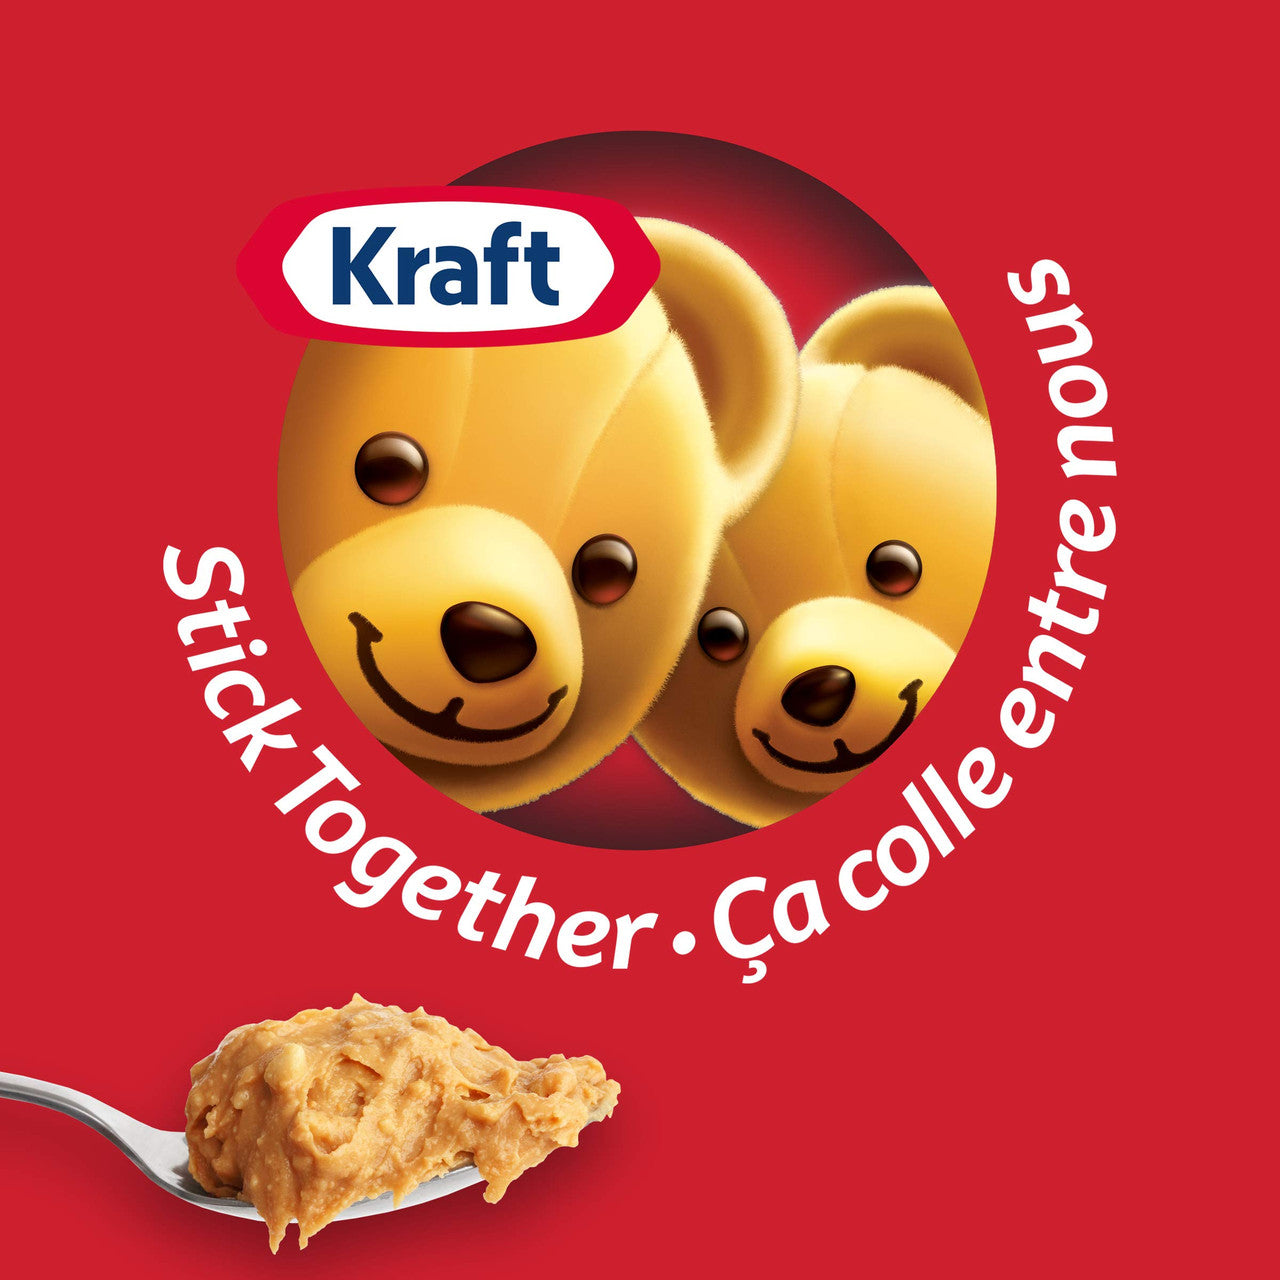 Kraft Crunchy Peanut Butter 2kg/4.4 lbs. {Imported from Canada}